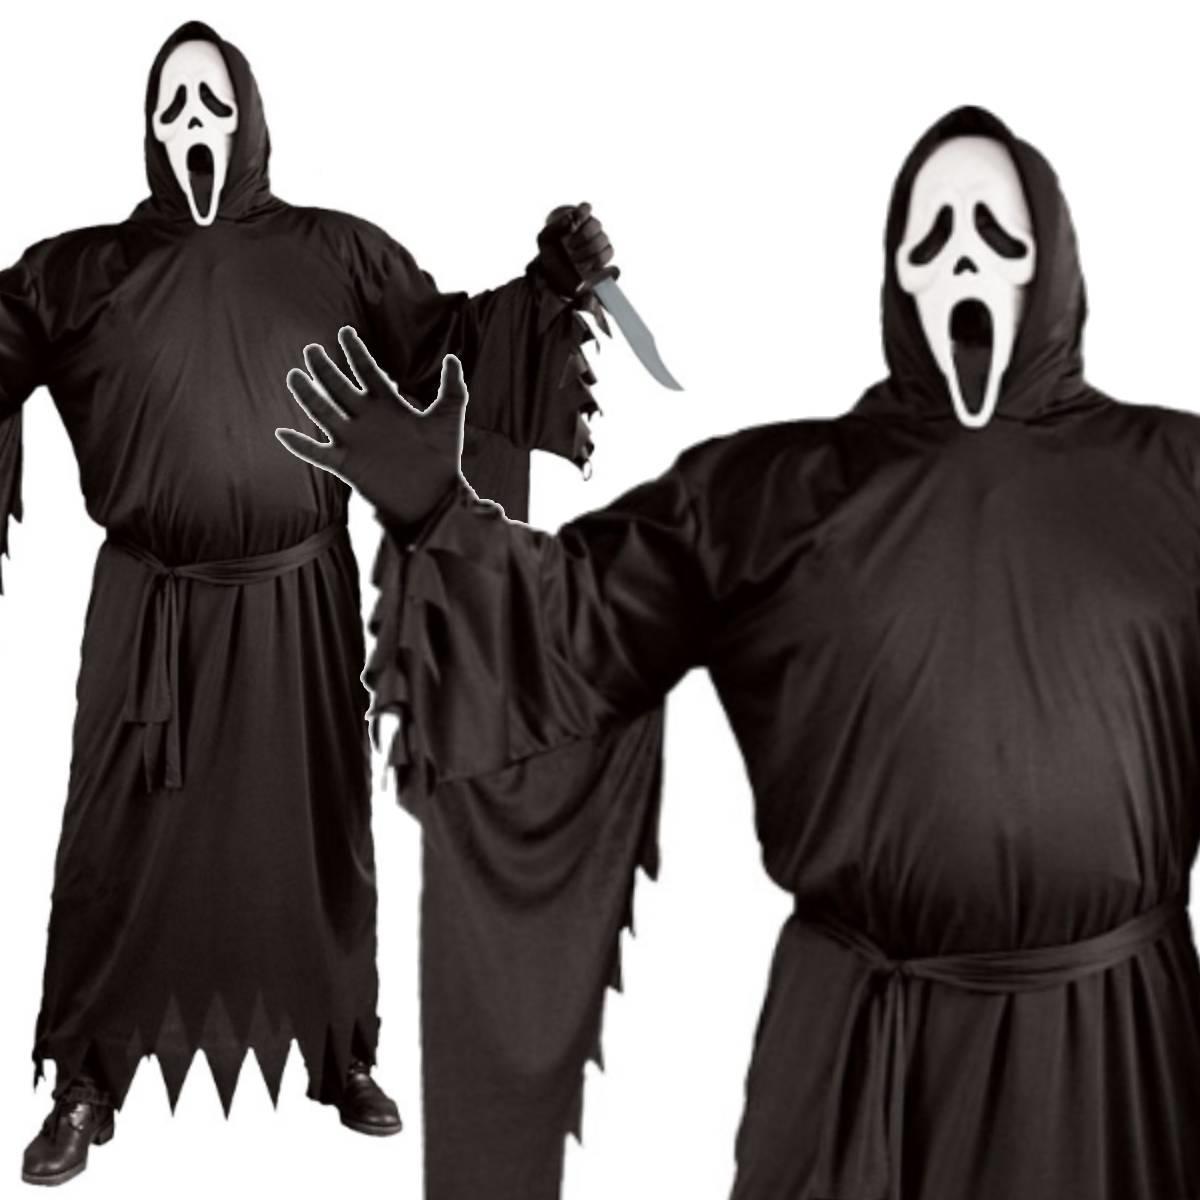 Ghost Face Scream Stalker Costume for Adults in XL by Fun World 1007 available here at Karnival Costumes online party shop